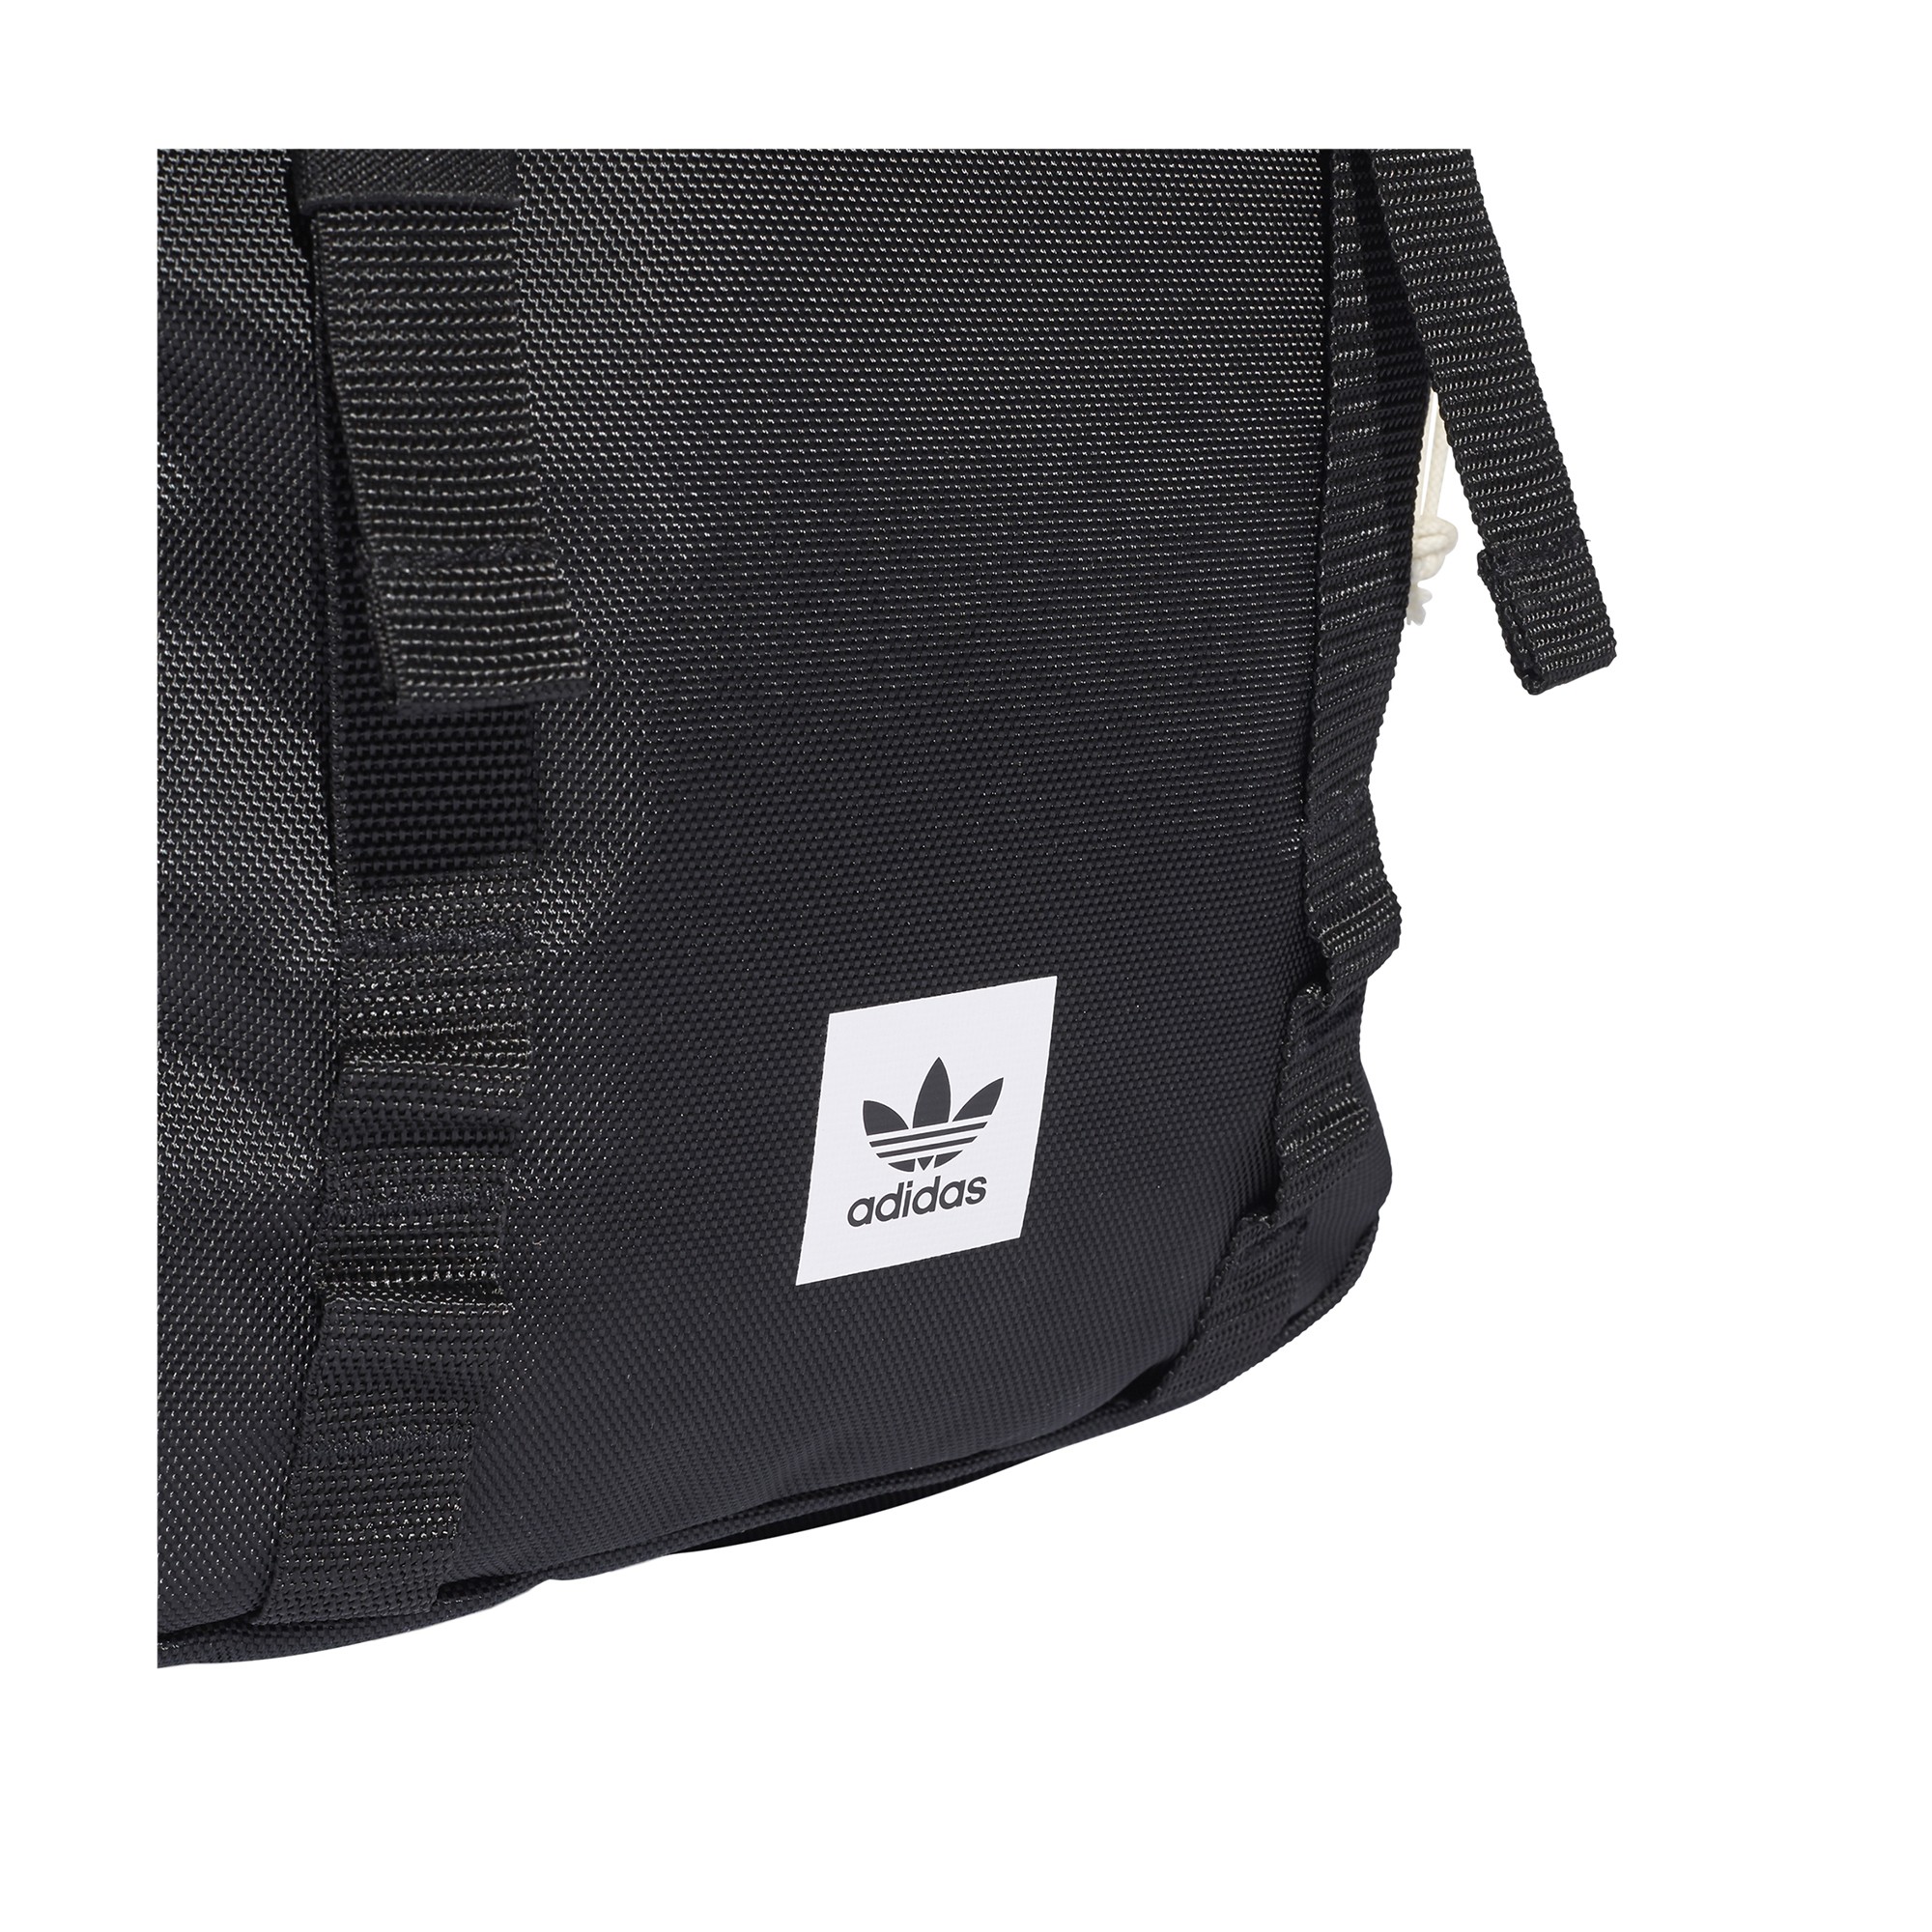 adidas atric classic backpack